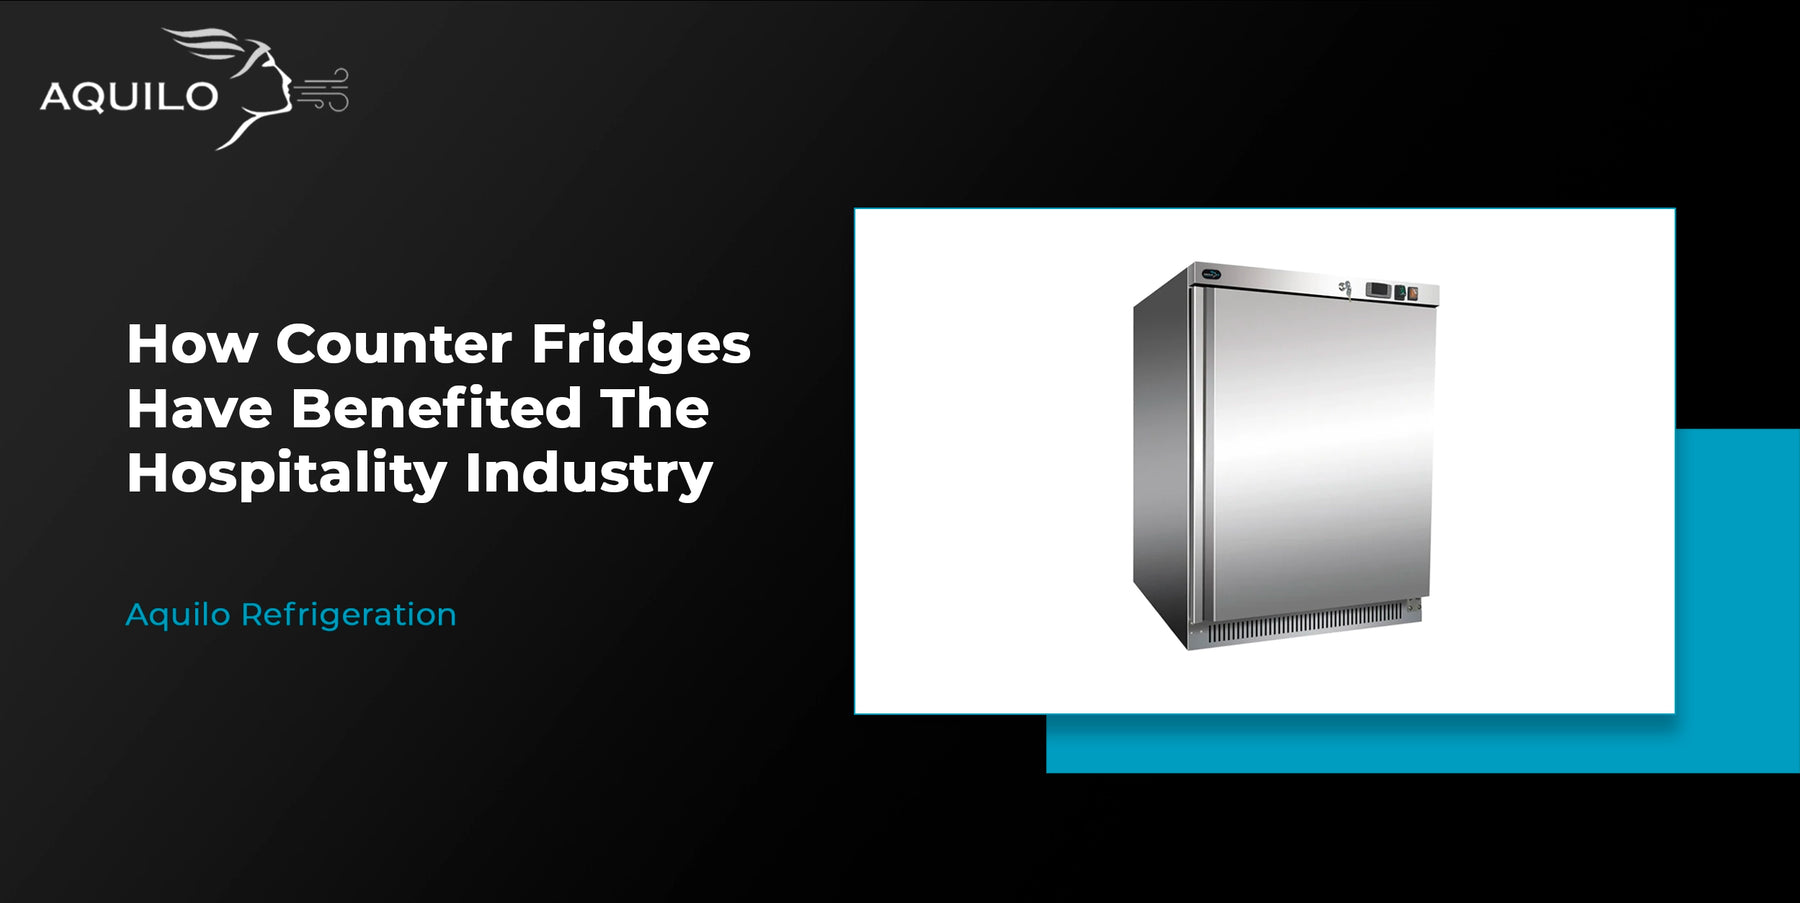 How have undercounter fridges benefited the hospitality industry?